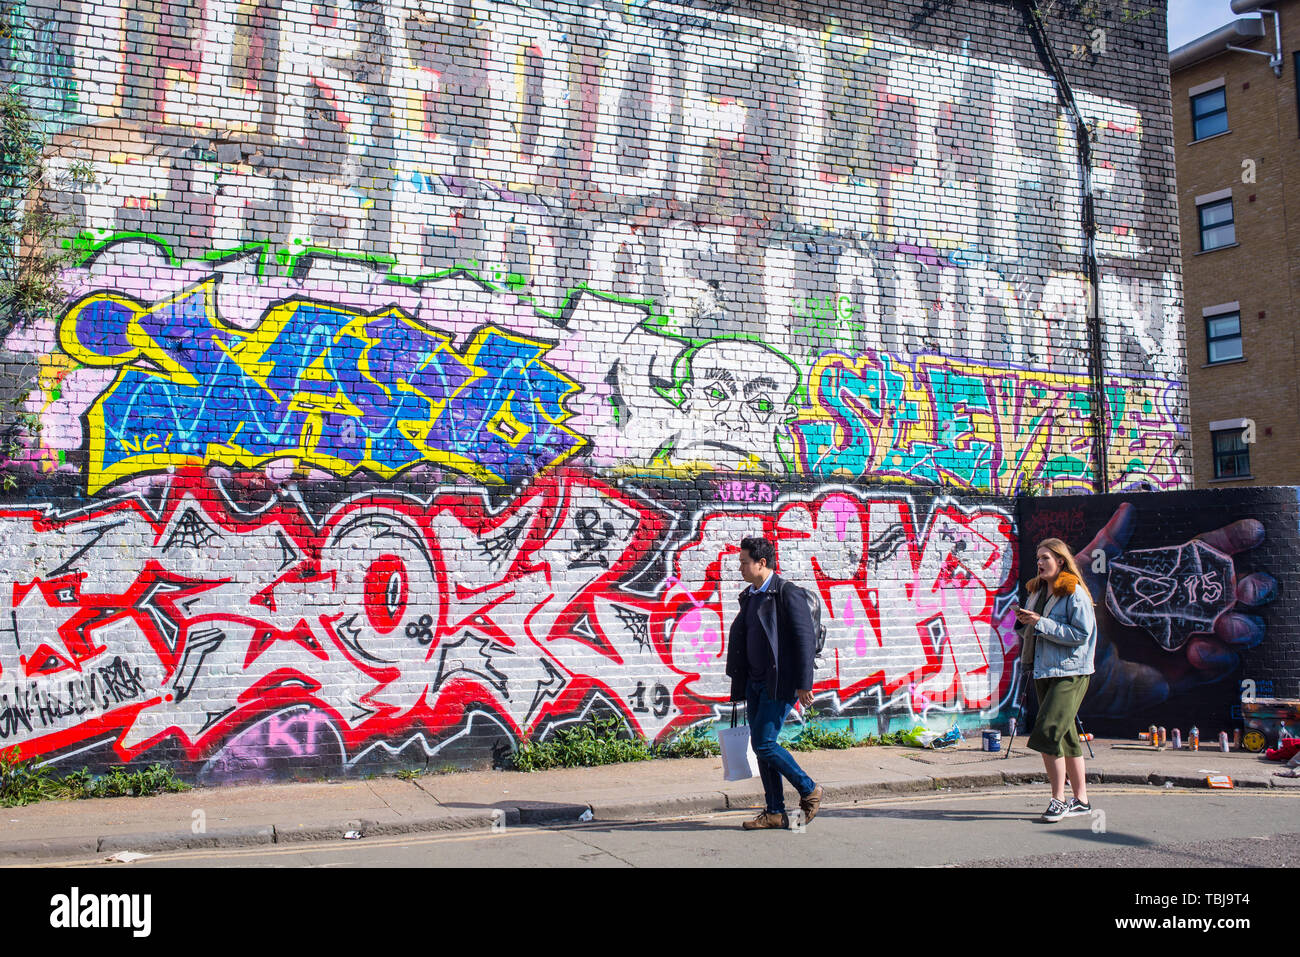 Shoreditch, London, England, UK - April 2019: People walking in Wheler street next to a wall covered in graffiti mural street art Stock Photo